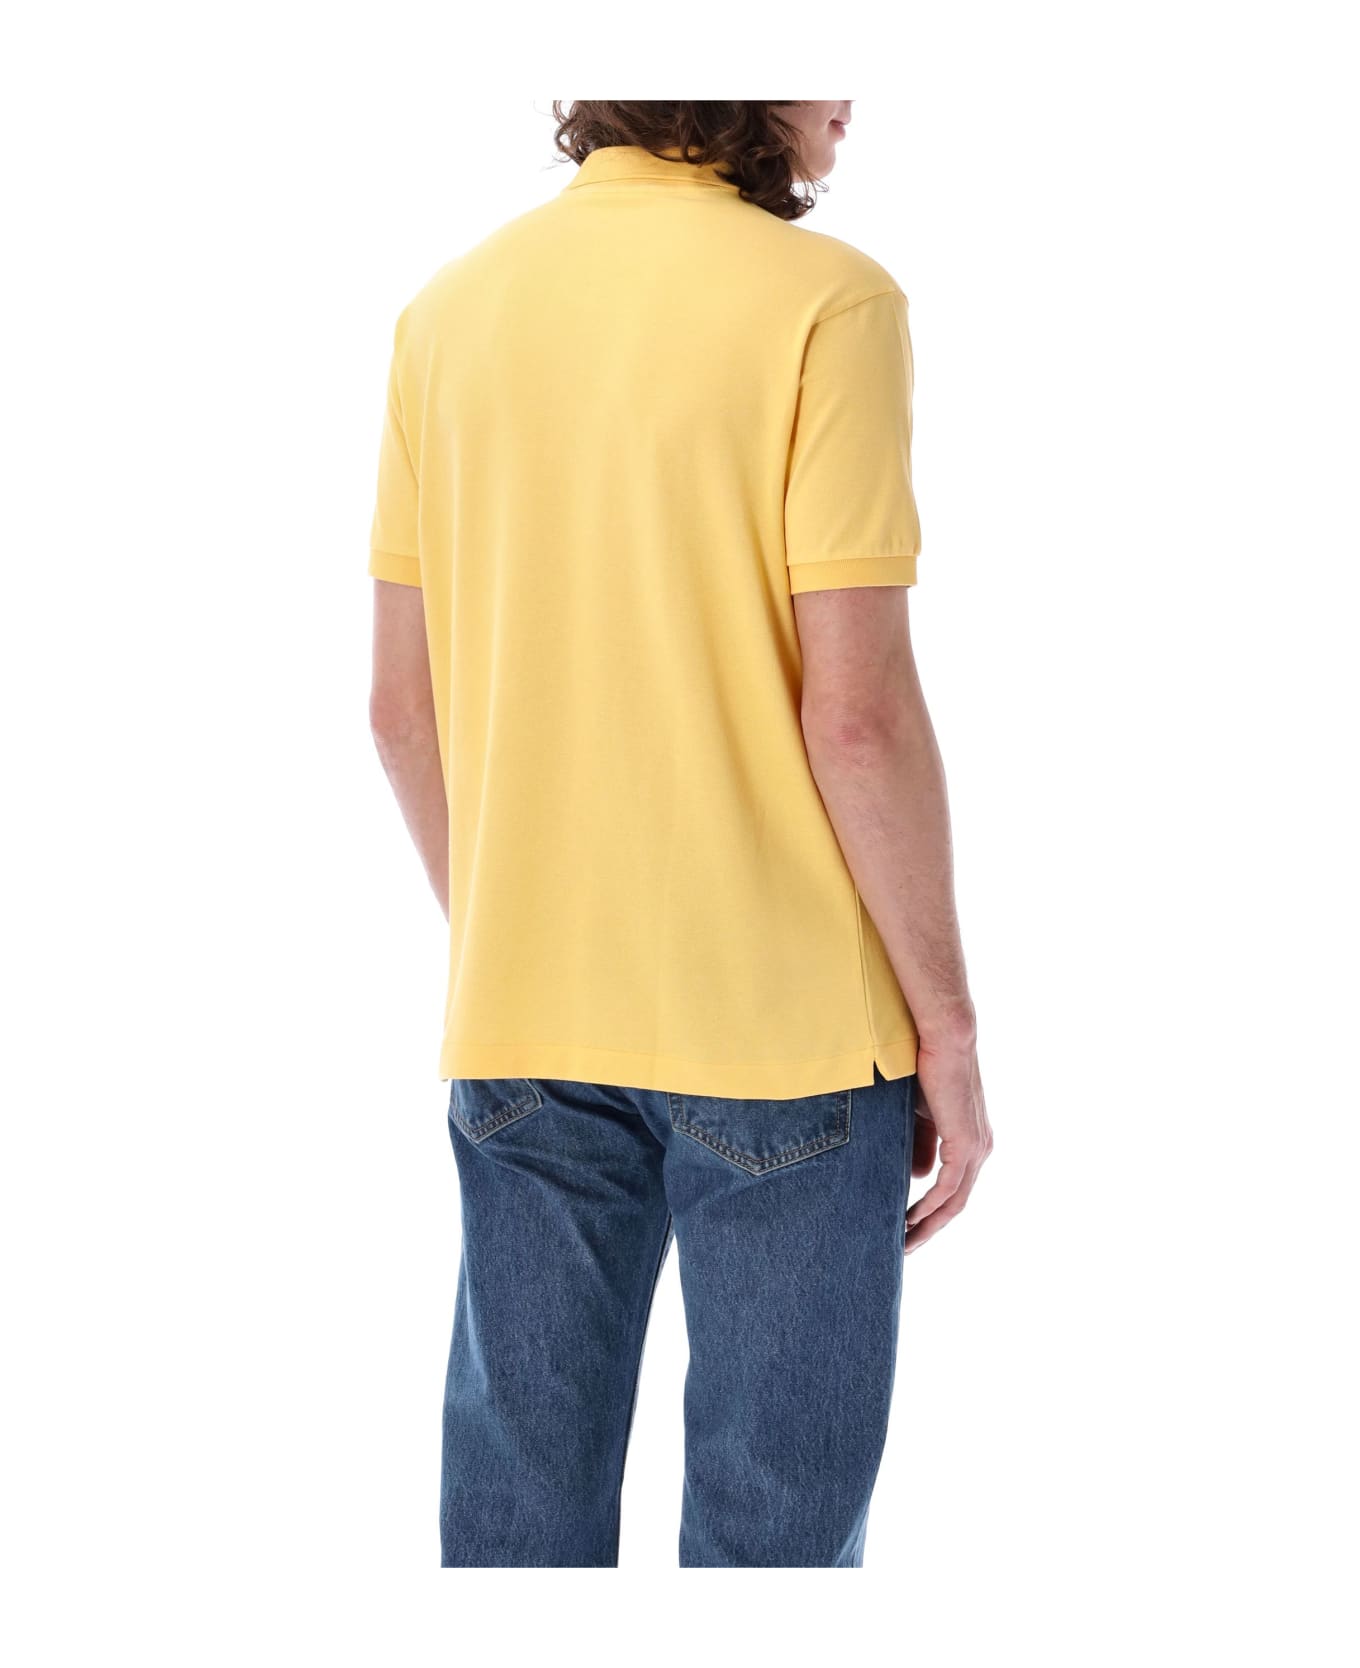 Lacoste Classic Fit Polo Shirt - YELLOW ポロシャツ